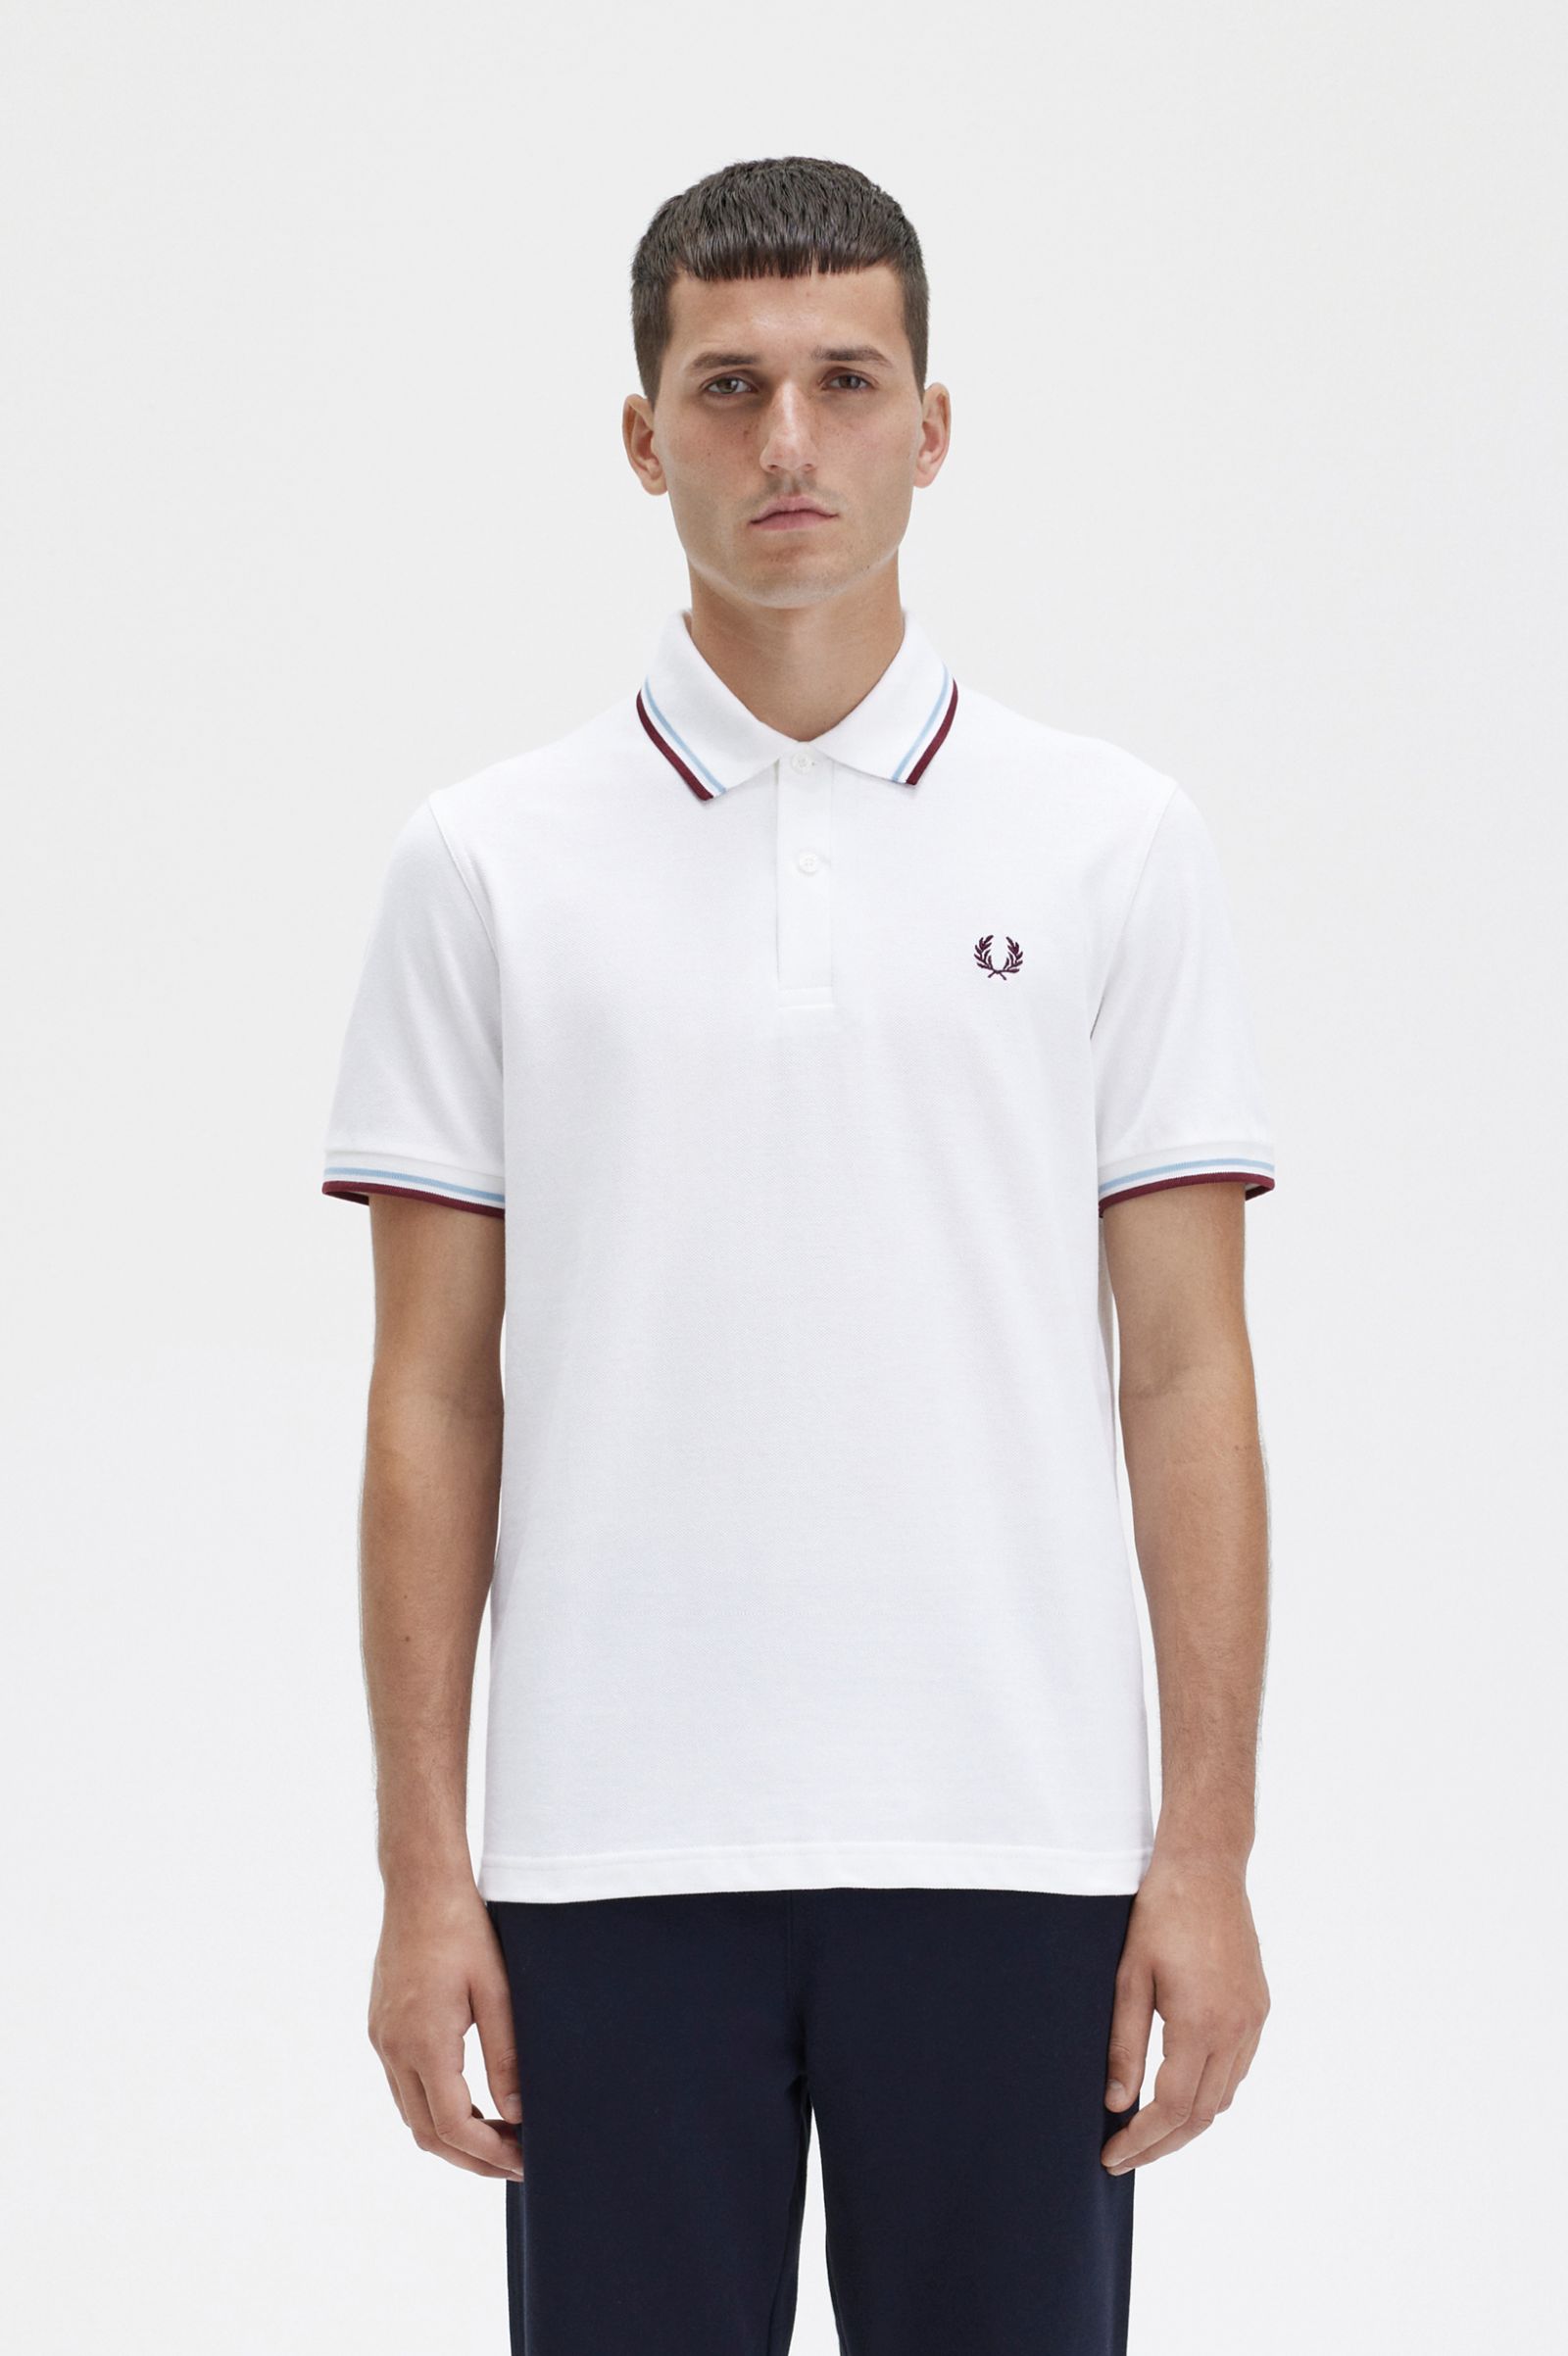 beginsel Stimulans Varken M12 - White / Ice / Maroon | The Fred Perry Shirt | Men's Short & Long  Sleeve Polo Shirts | Fred Perry US